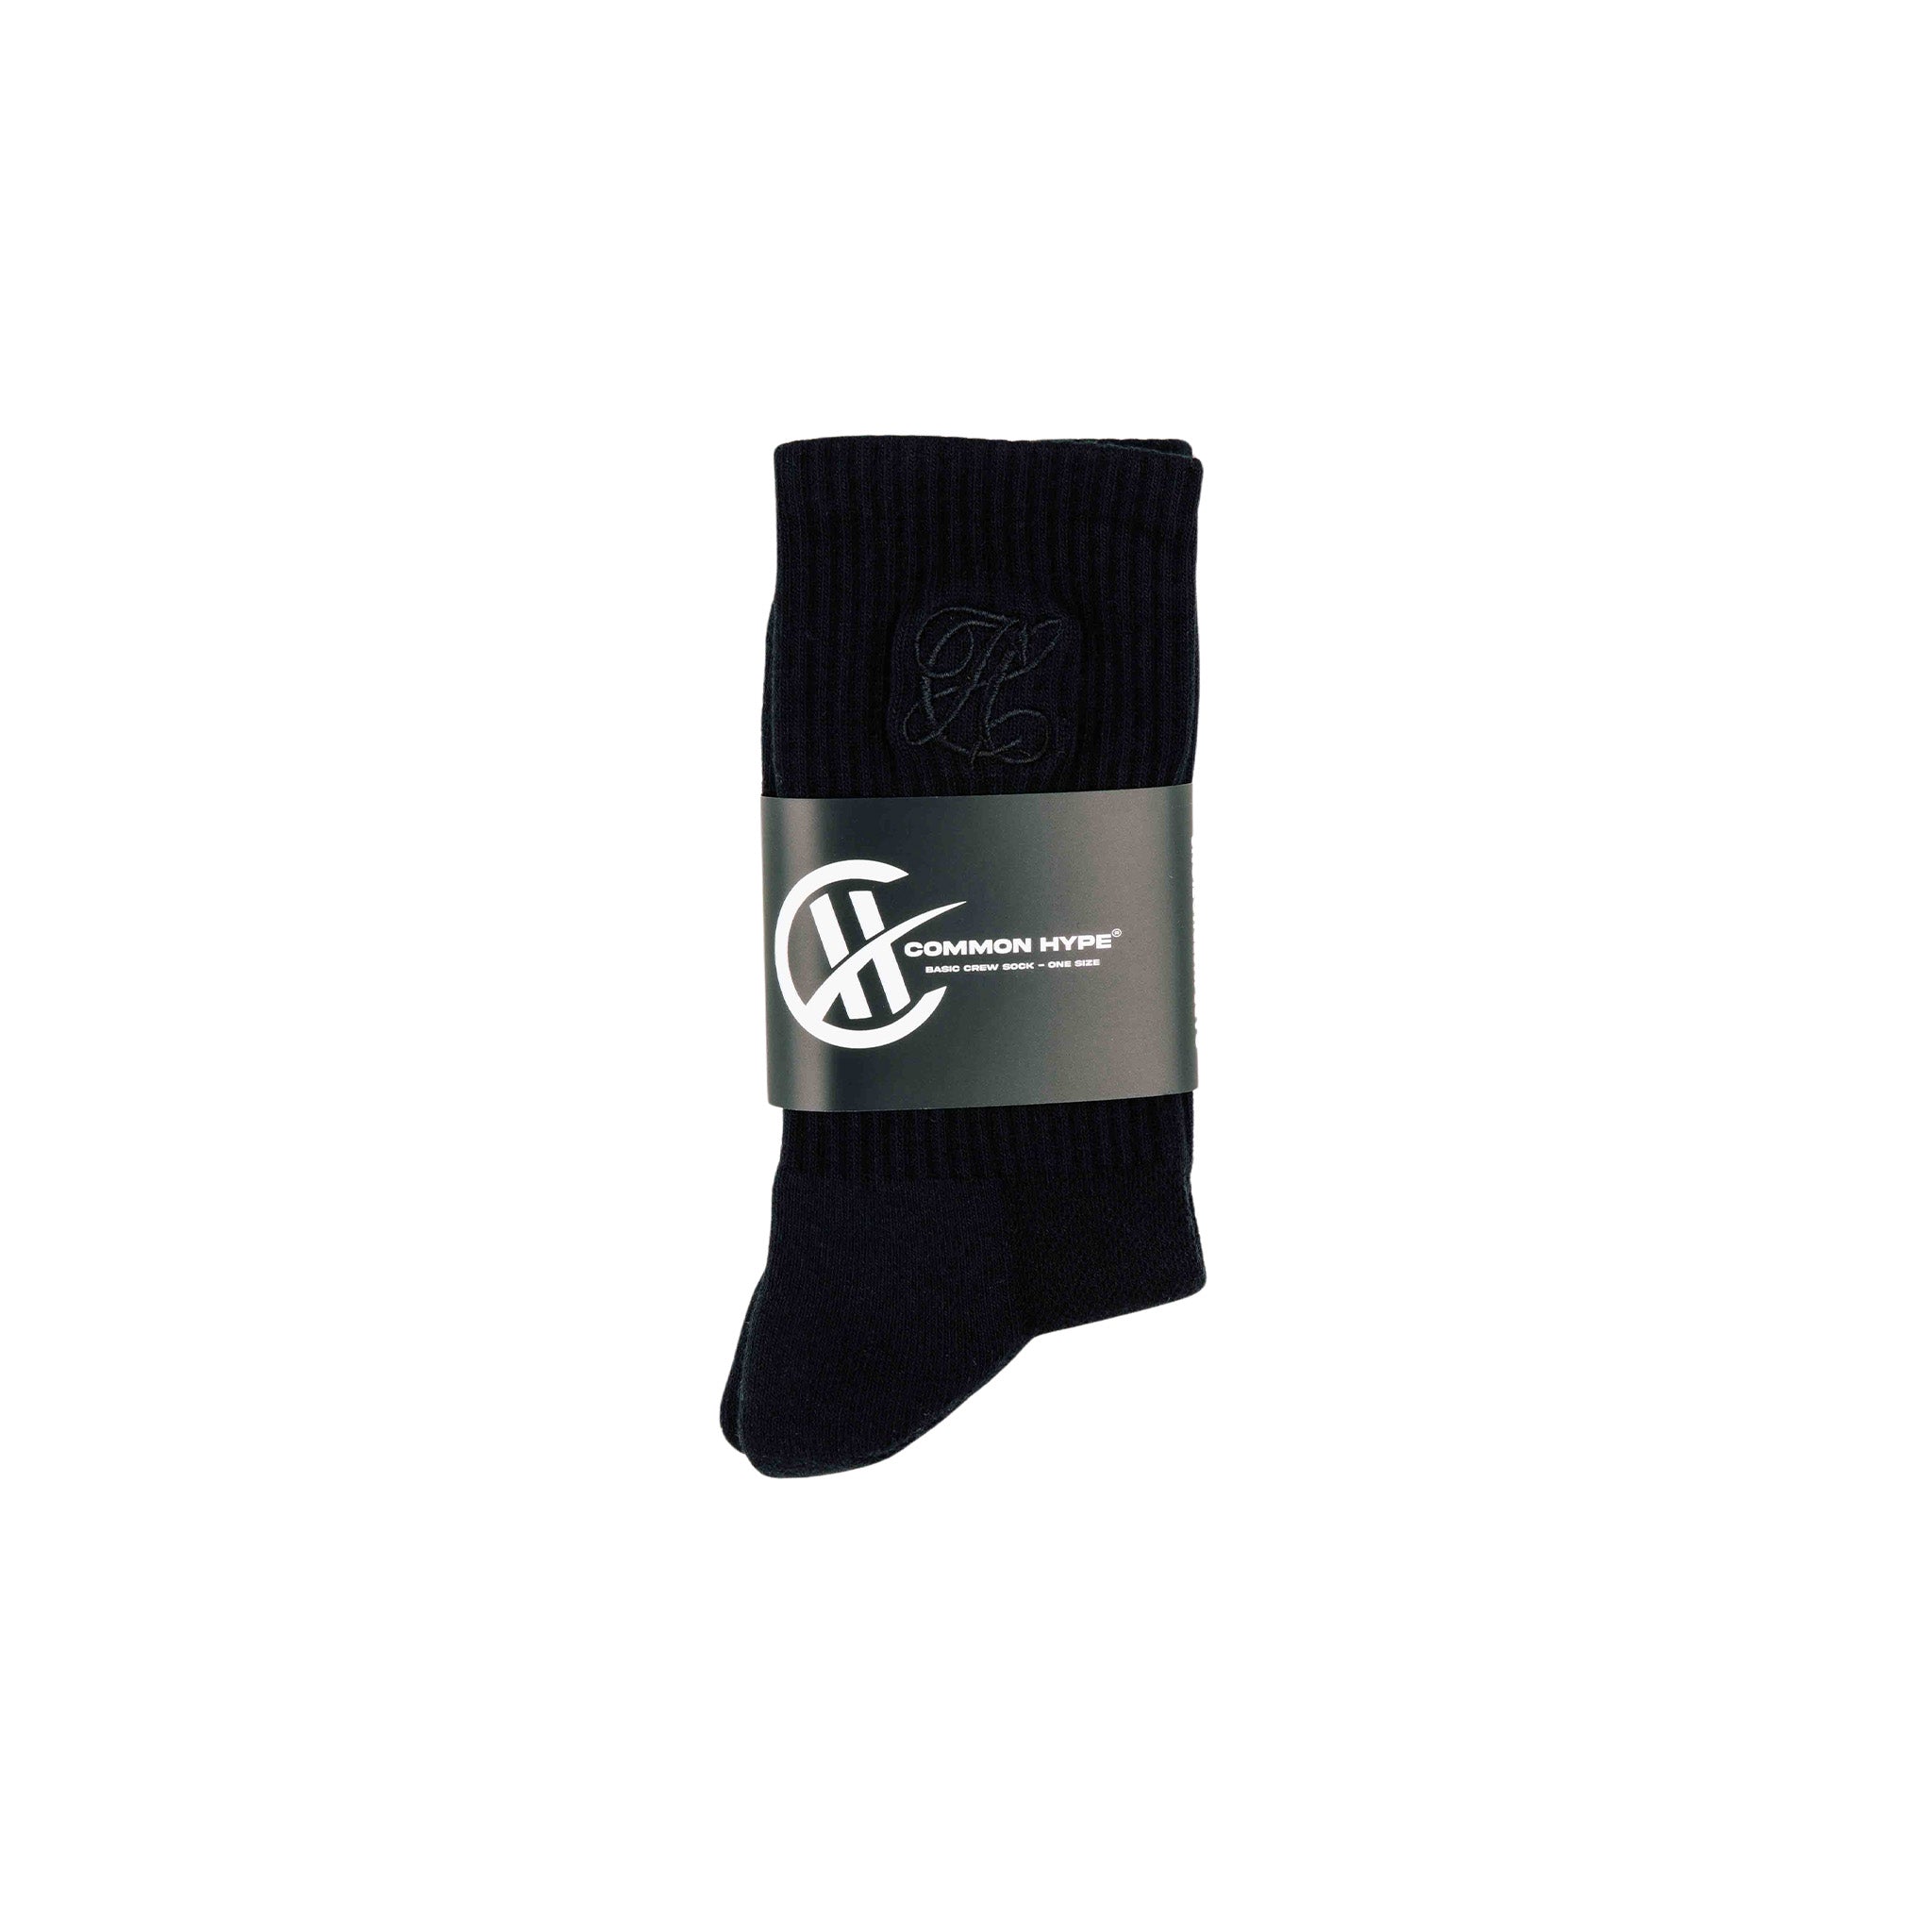 Common Hype Tonal Embroidered Sock Black